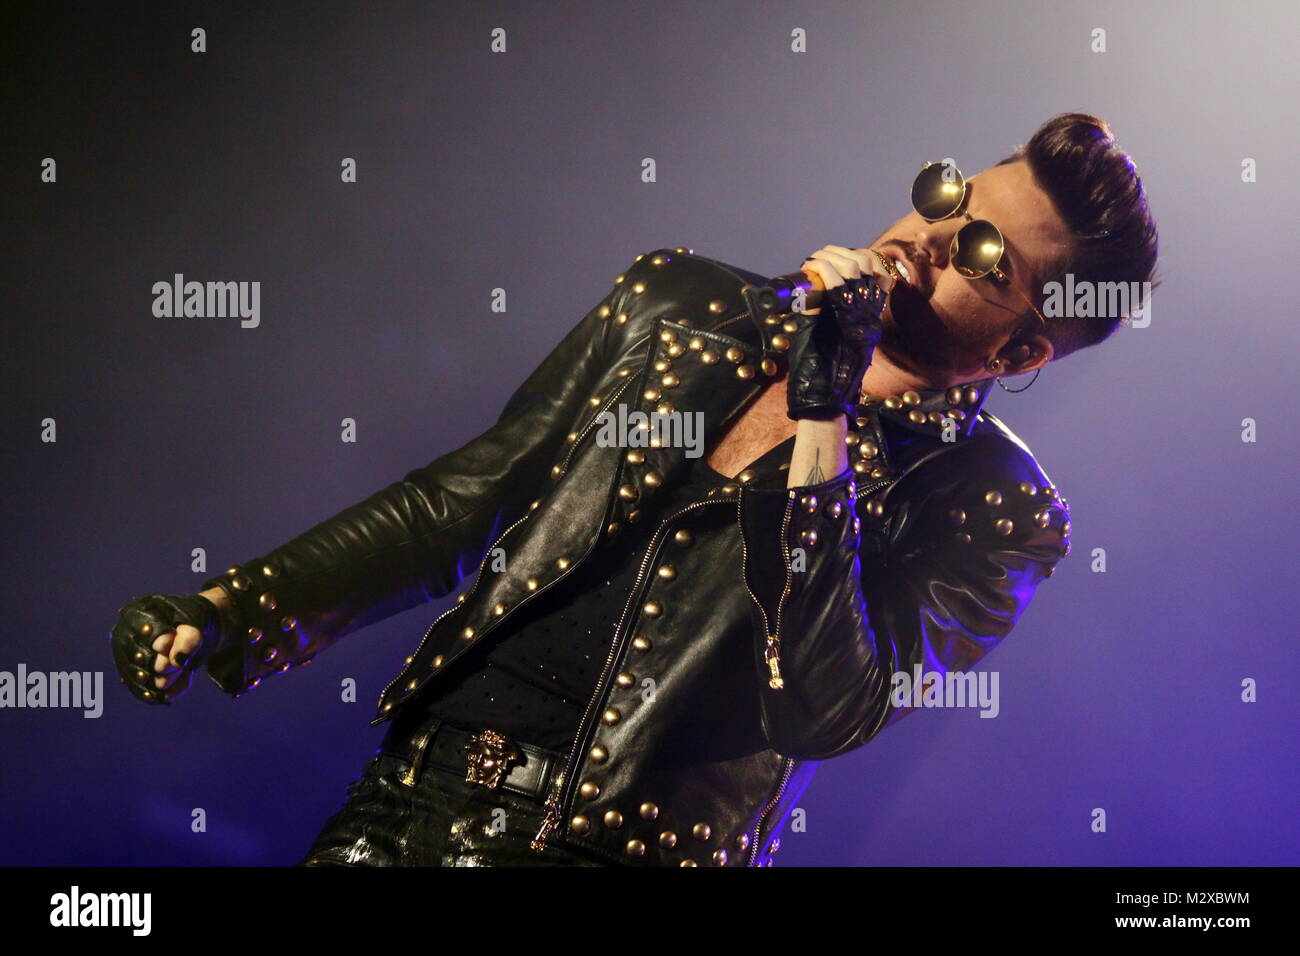 Frankfurt, Germany. 7th Feb, 2015. Queen + Adam Lambert, collaboration between the active members of the British rock band Queen (Brian May and Roger Taylor) and American vocalist Adam Lambert. Concert at Festhalle Frankfurt, Germany. Here: Adam Lambert. Credit: Christian Lademann Stock Photo